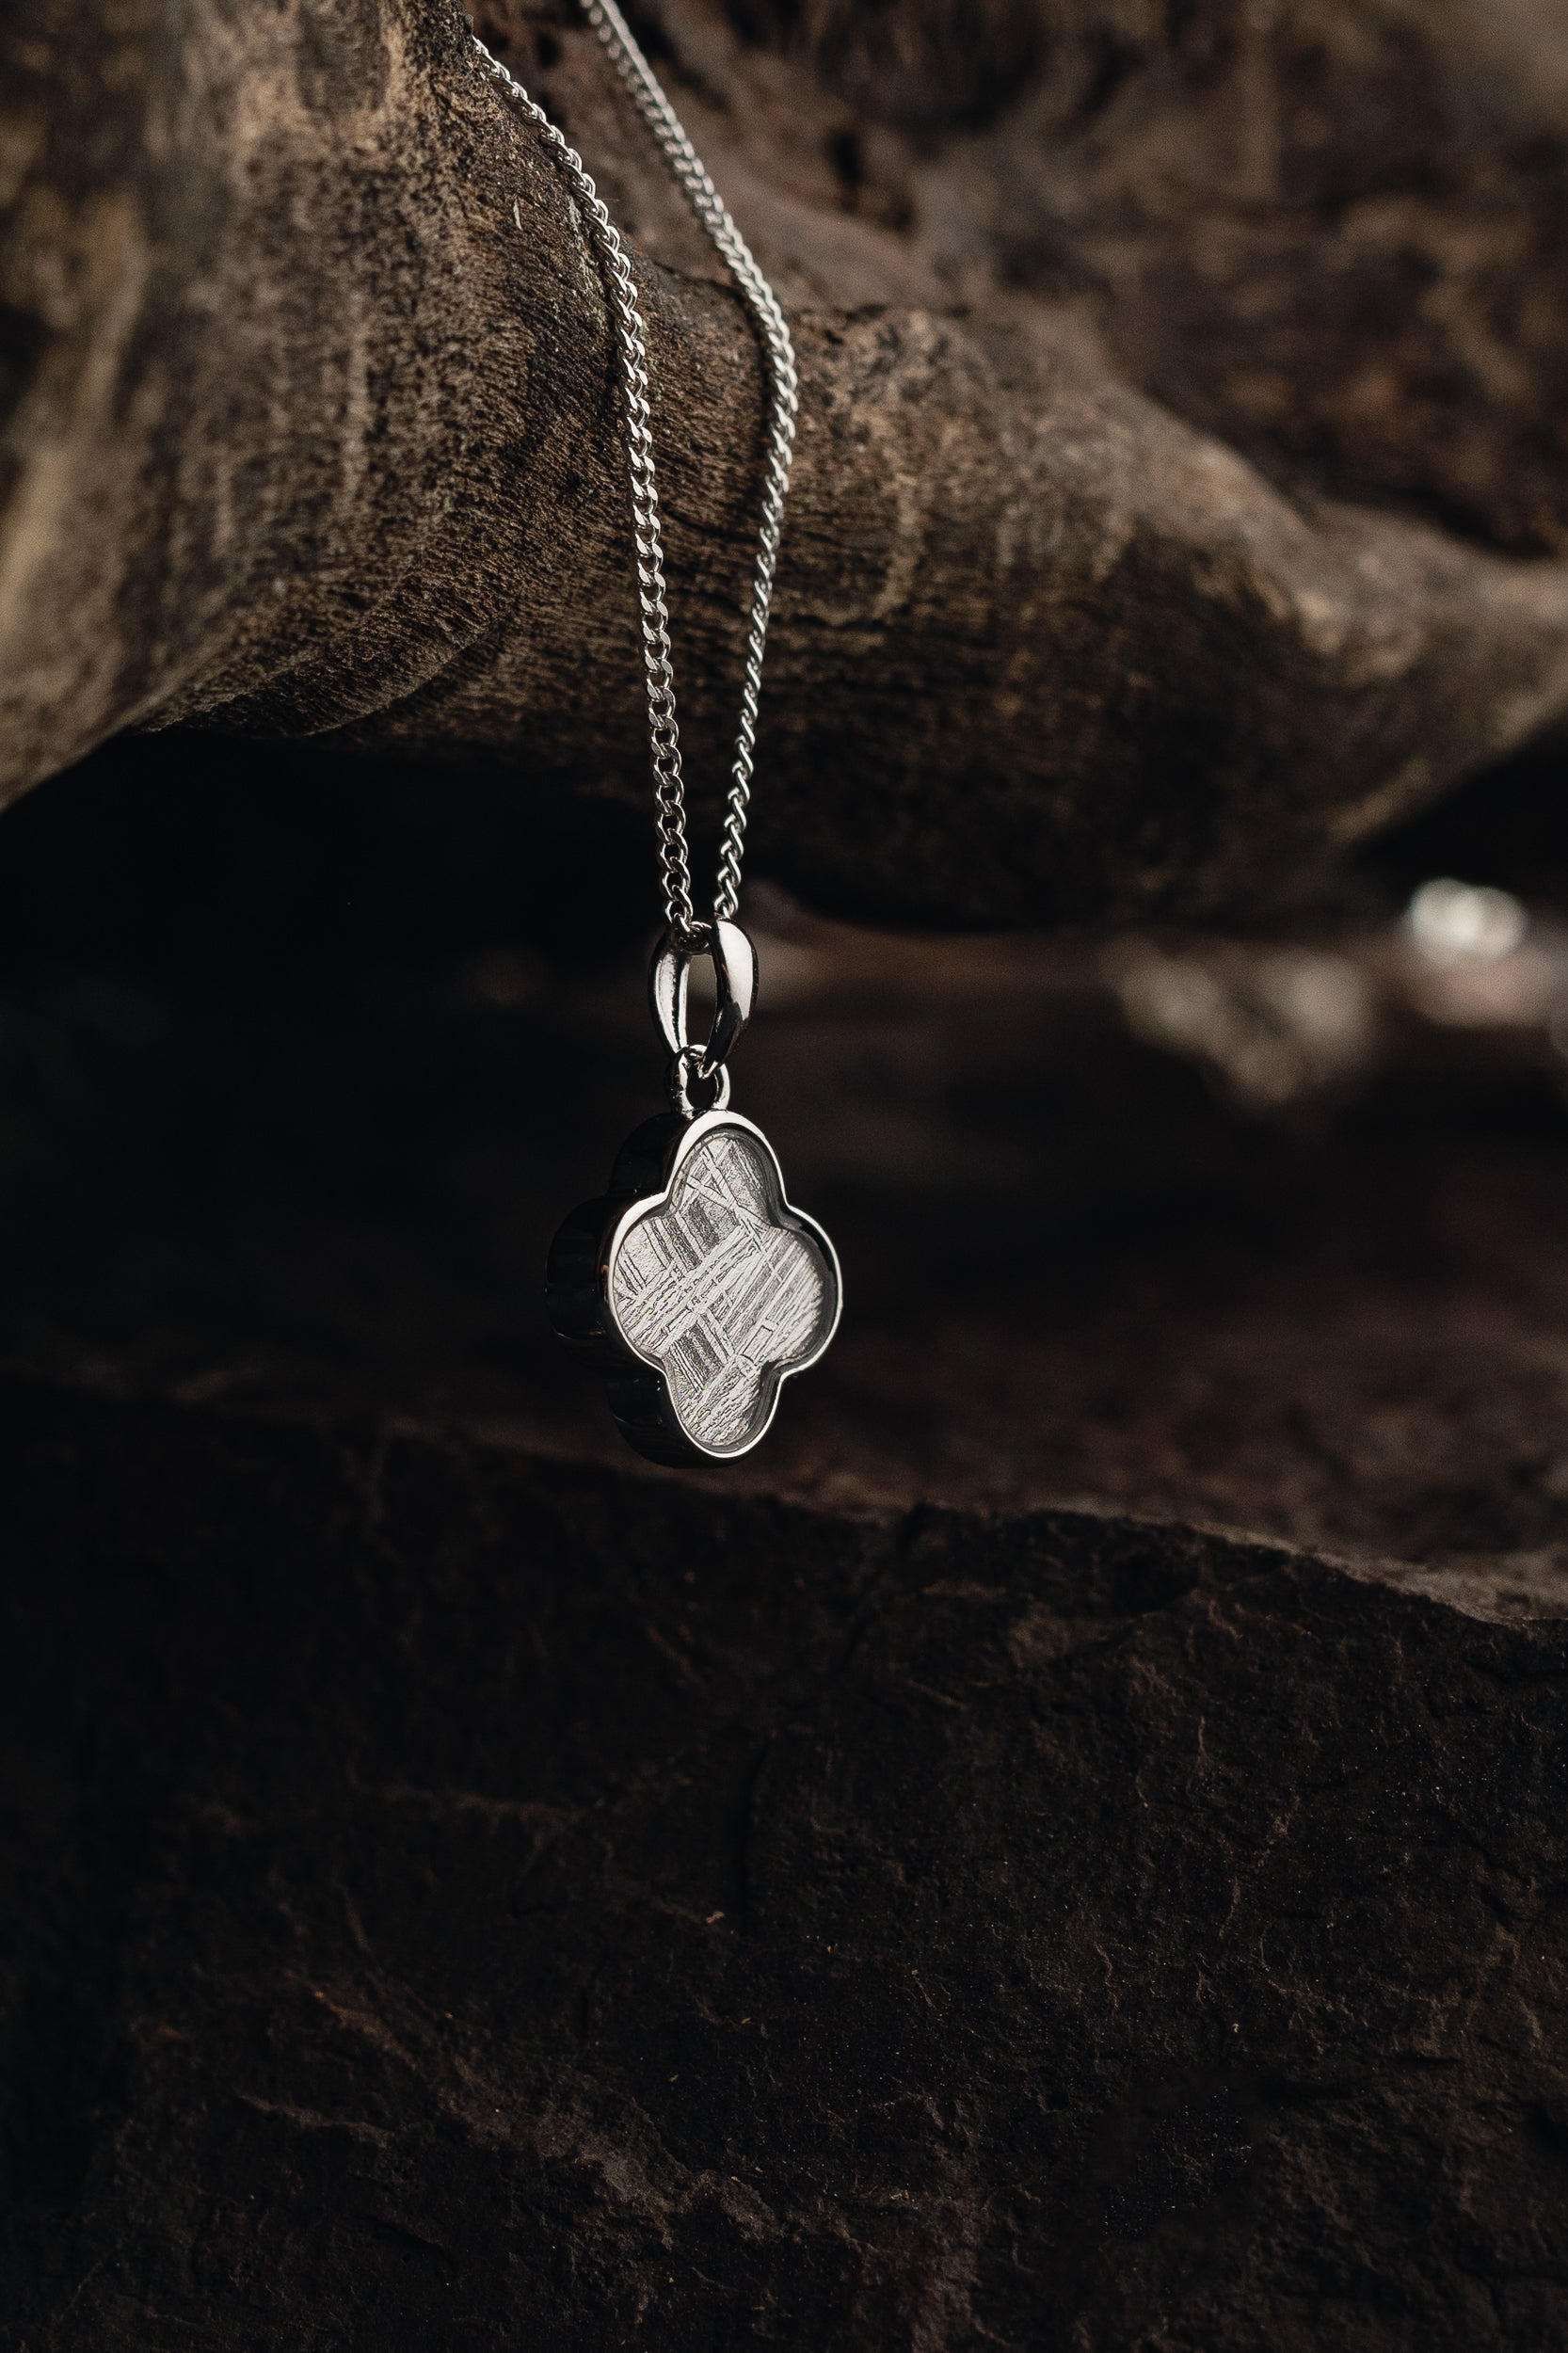 Handcrafted meteorite pendant with silver setting - authentic Muonionalusta meteorite, a celestial style with a genuine meteorite centerpiece. Explore the cosmos with this unique meteorite jewelry piece.